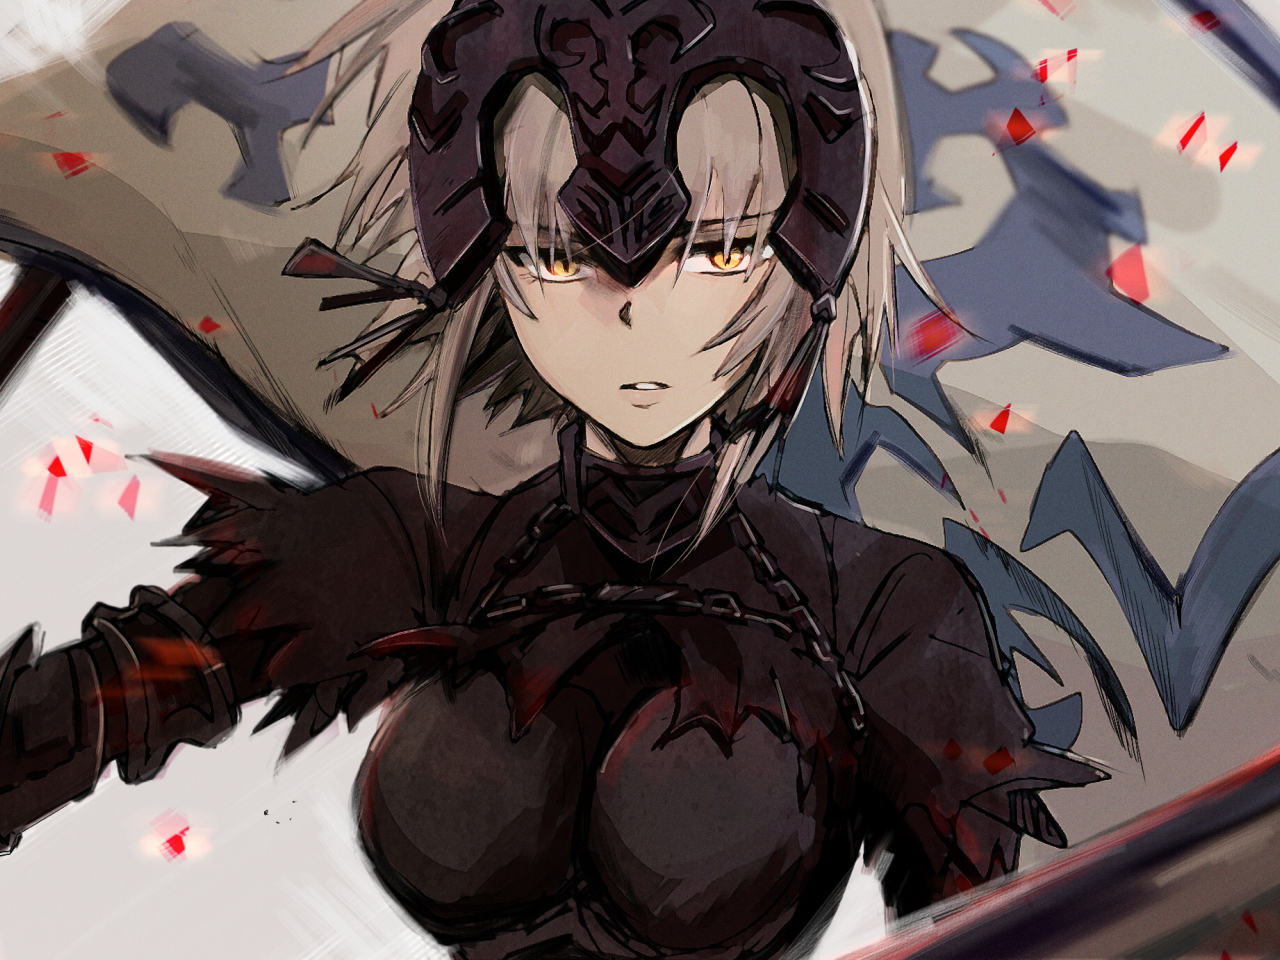 Download wallpaper 1280x960 jeanne d'arc alter, fate/stay night, anime ...